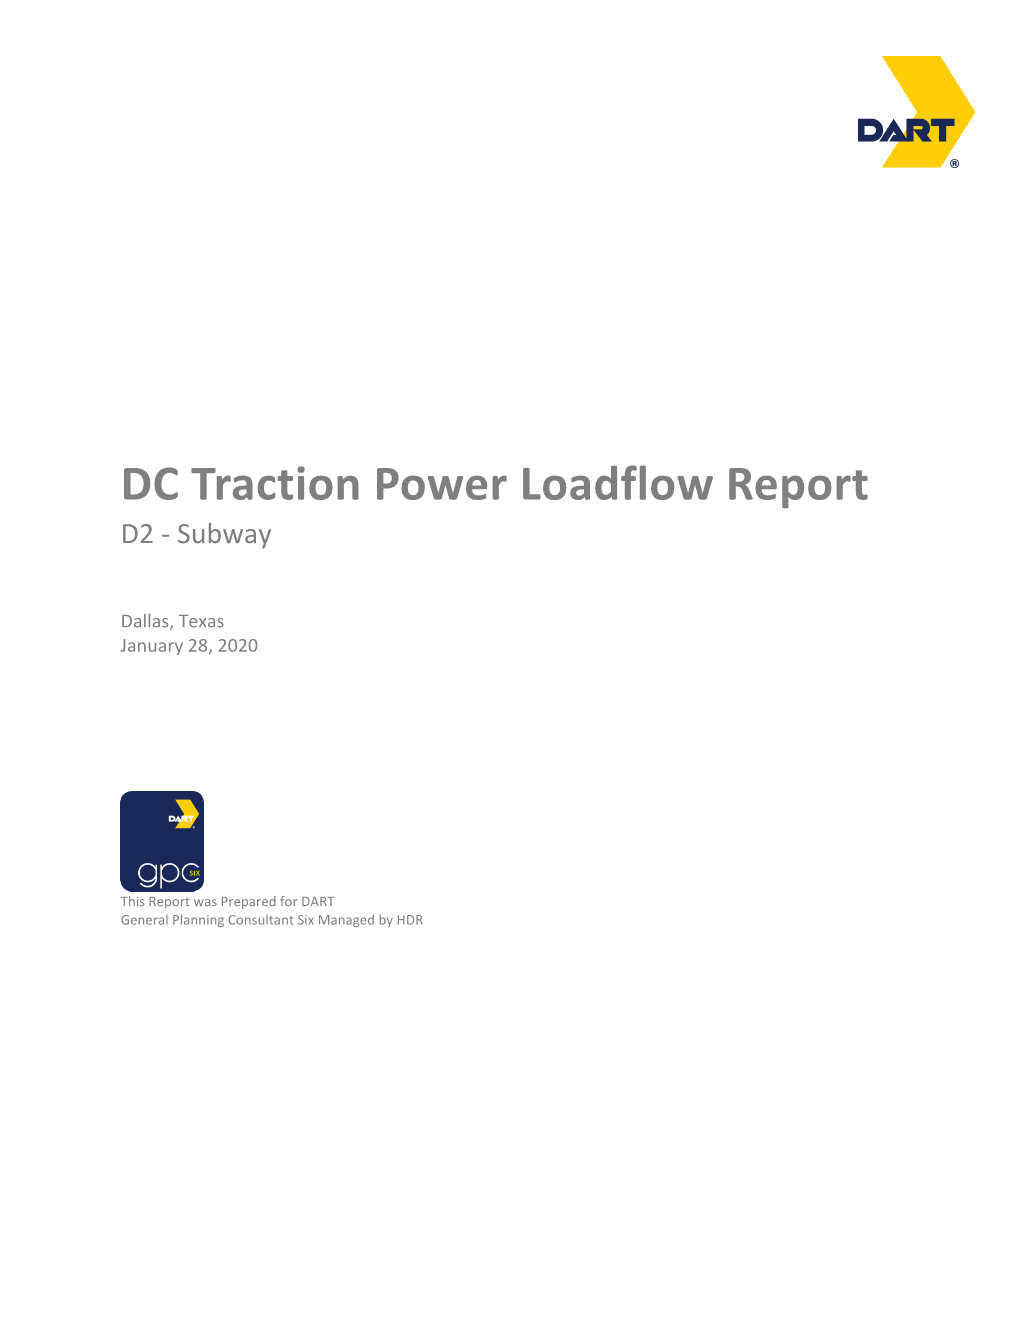 D2 DC Traction Power Loadflow Report HDR Report Number: Click Here to Enter Text